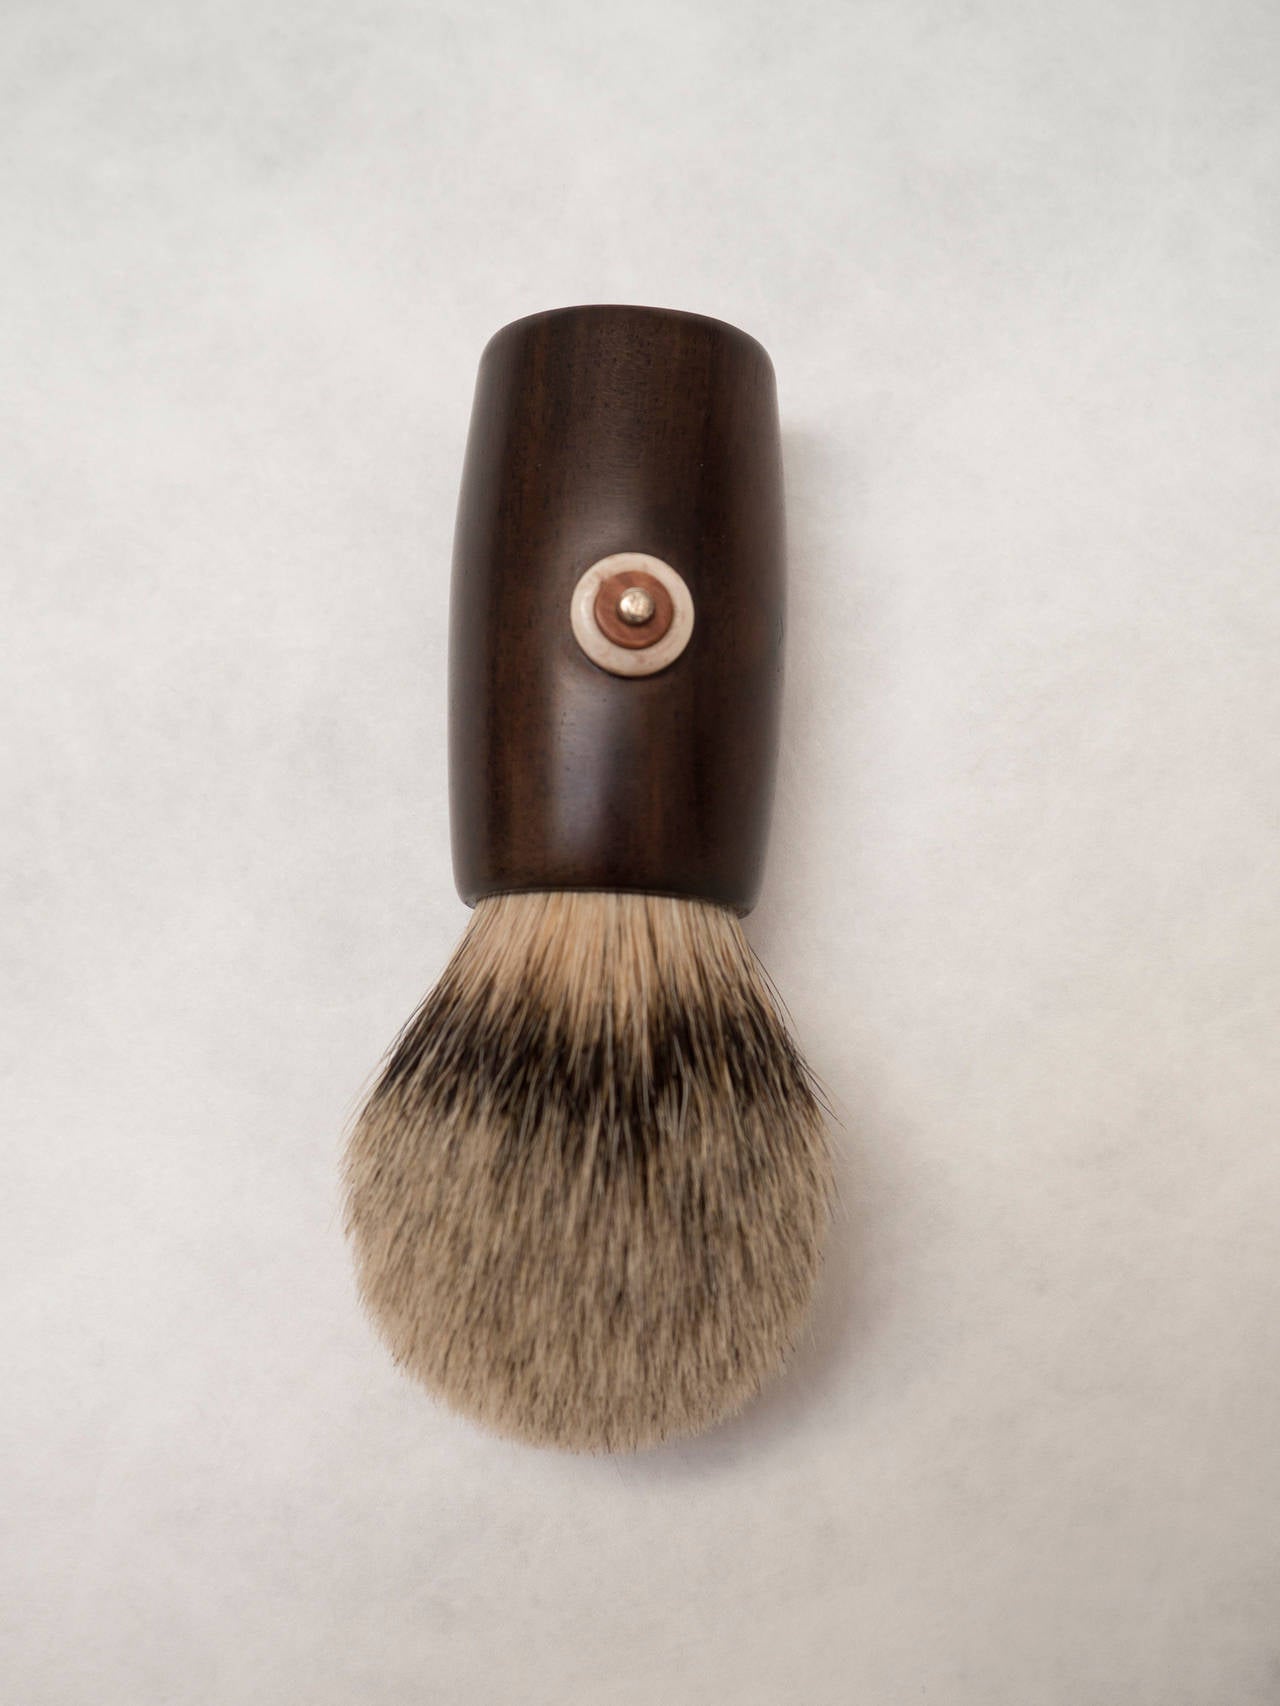 Men's shaving brush made of badger hair and wood with silver and bone detail.